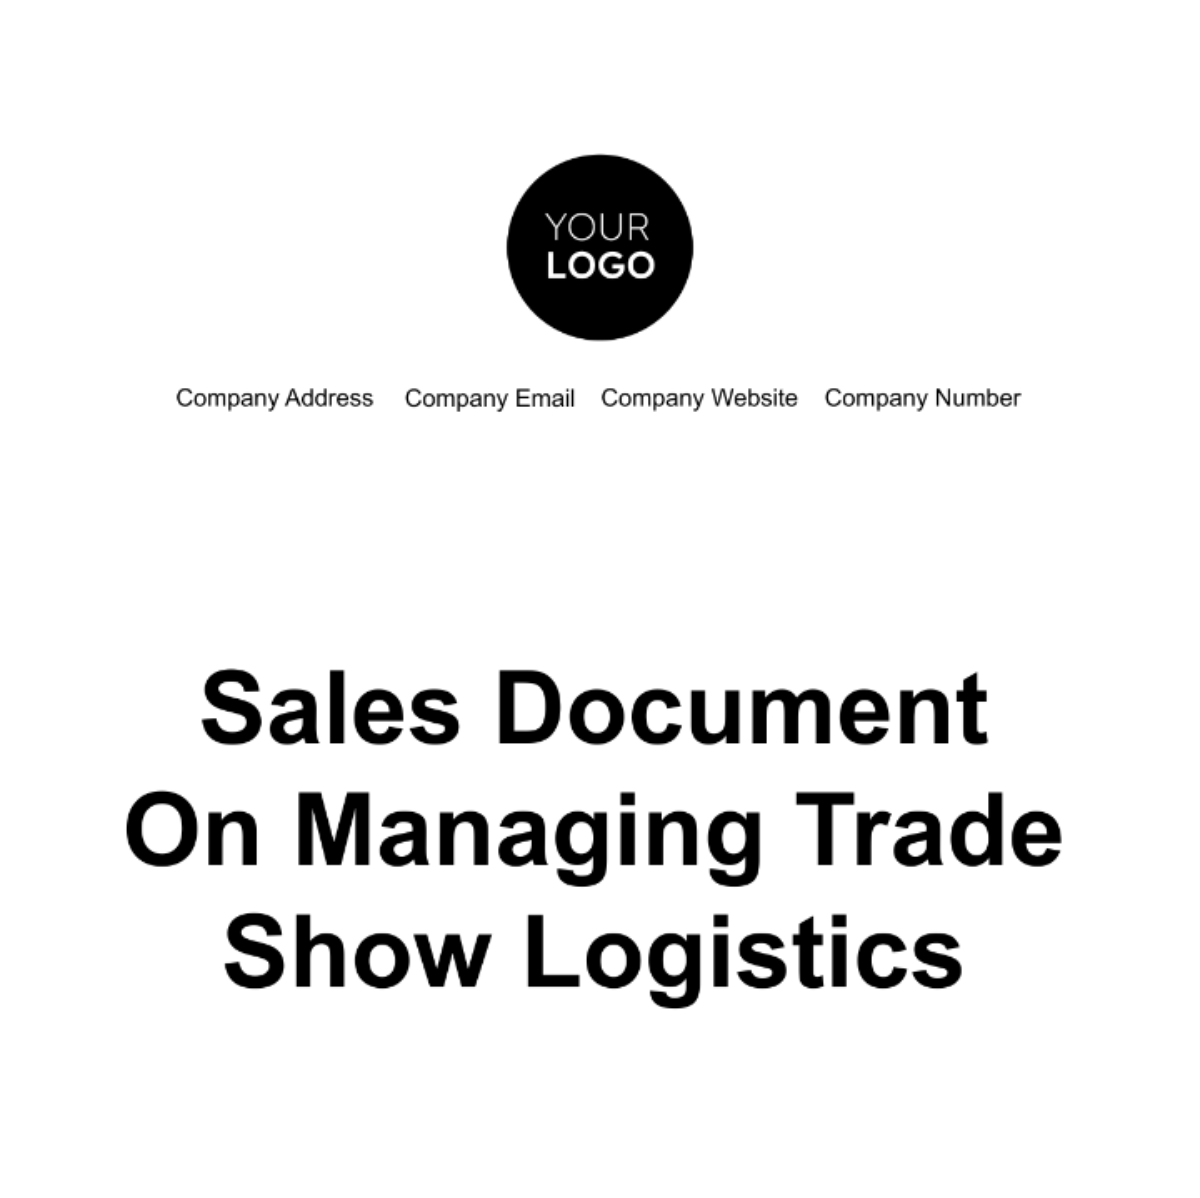 Free Sales Document on Managing Trade Show Logistics Template